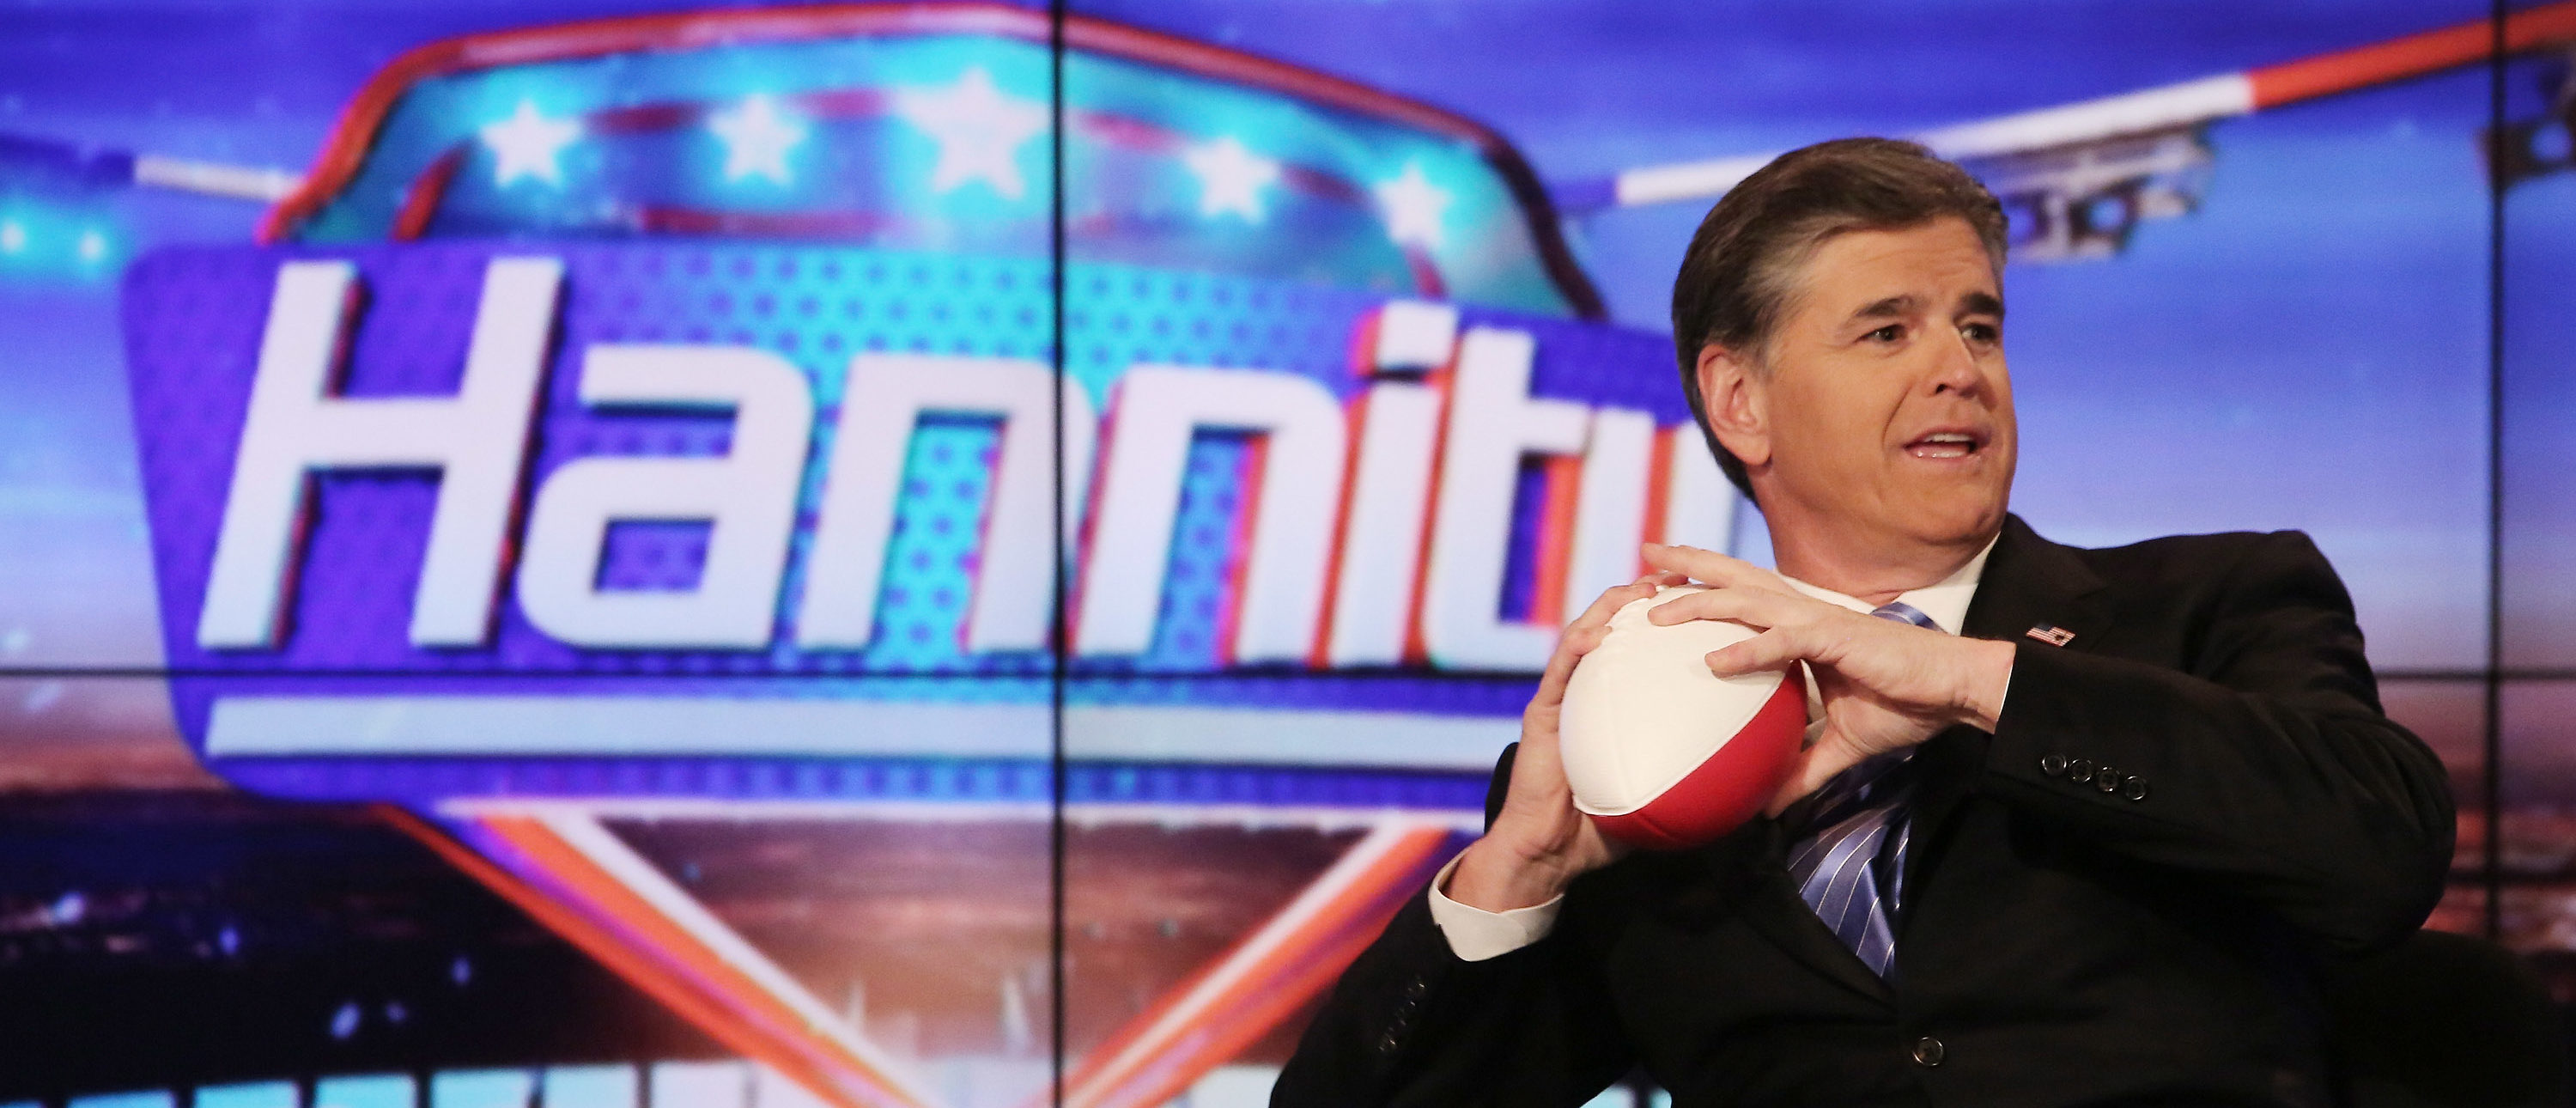 POLL: Vote For Your Favorite Fox News Channel Show | The Daily Caller3000 x 1290